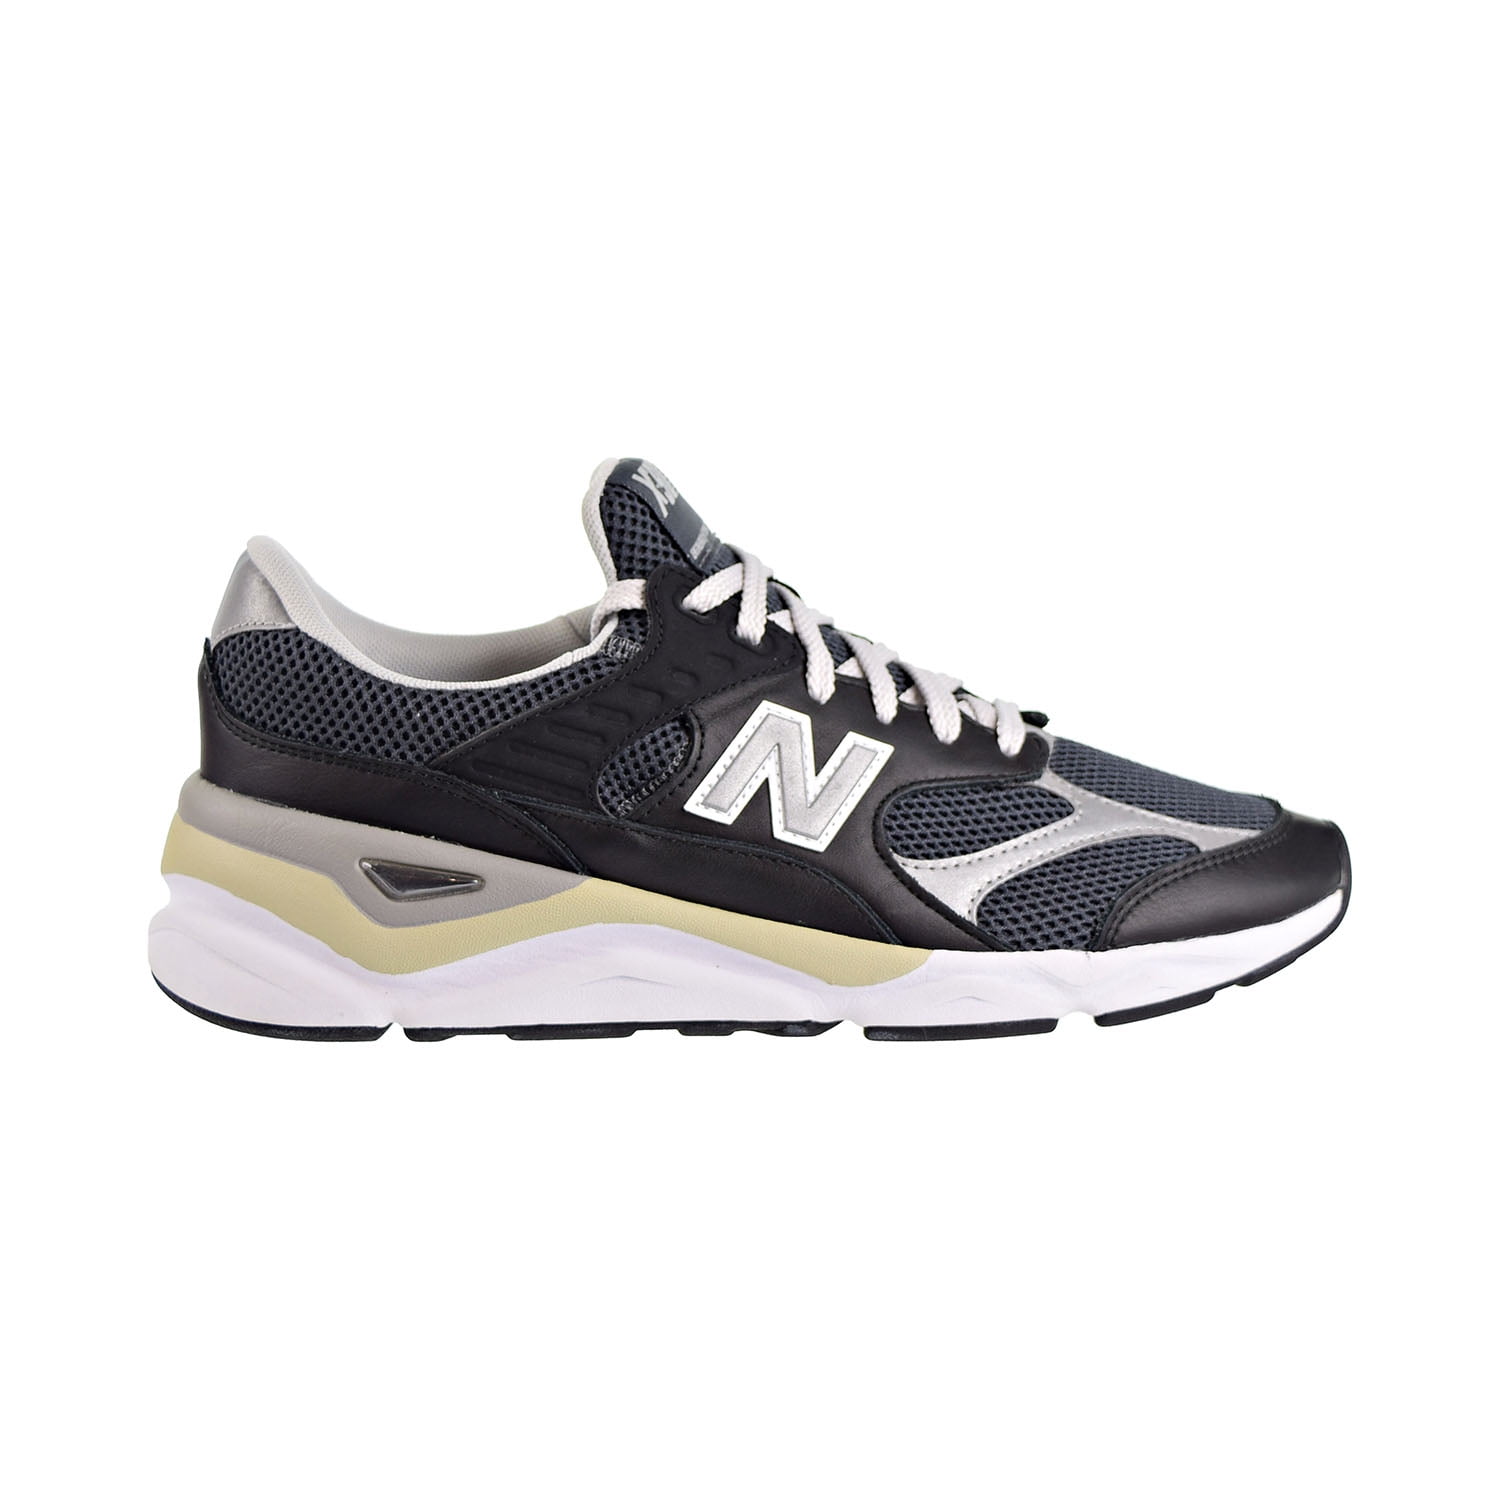 Gym Inaccurate University New Balance Men's X-90 Reconstructed Shoes Black with Grey - Walmart.com